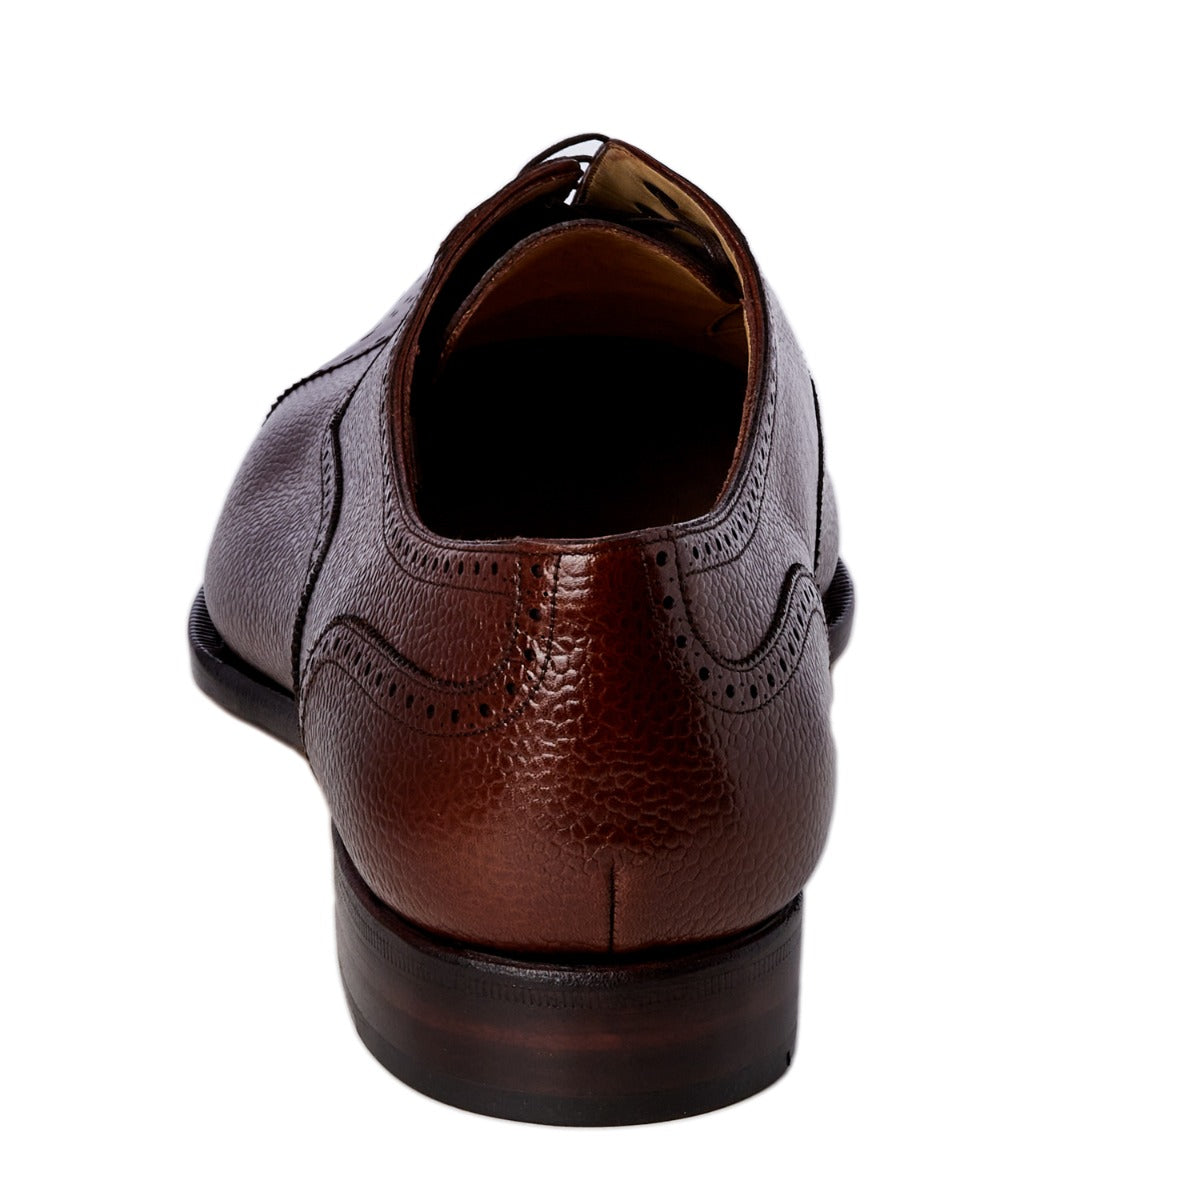 A men's TLB Antique Brown Pebble Grain Semi-Brogue 13UK oxford shoe on a white background, made-to-order by KirbyAllison.com.